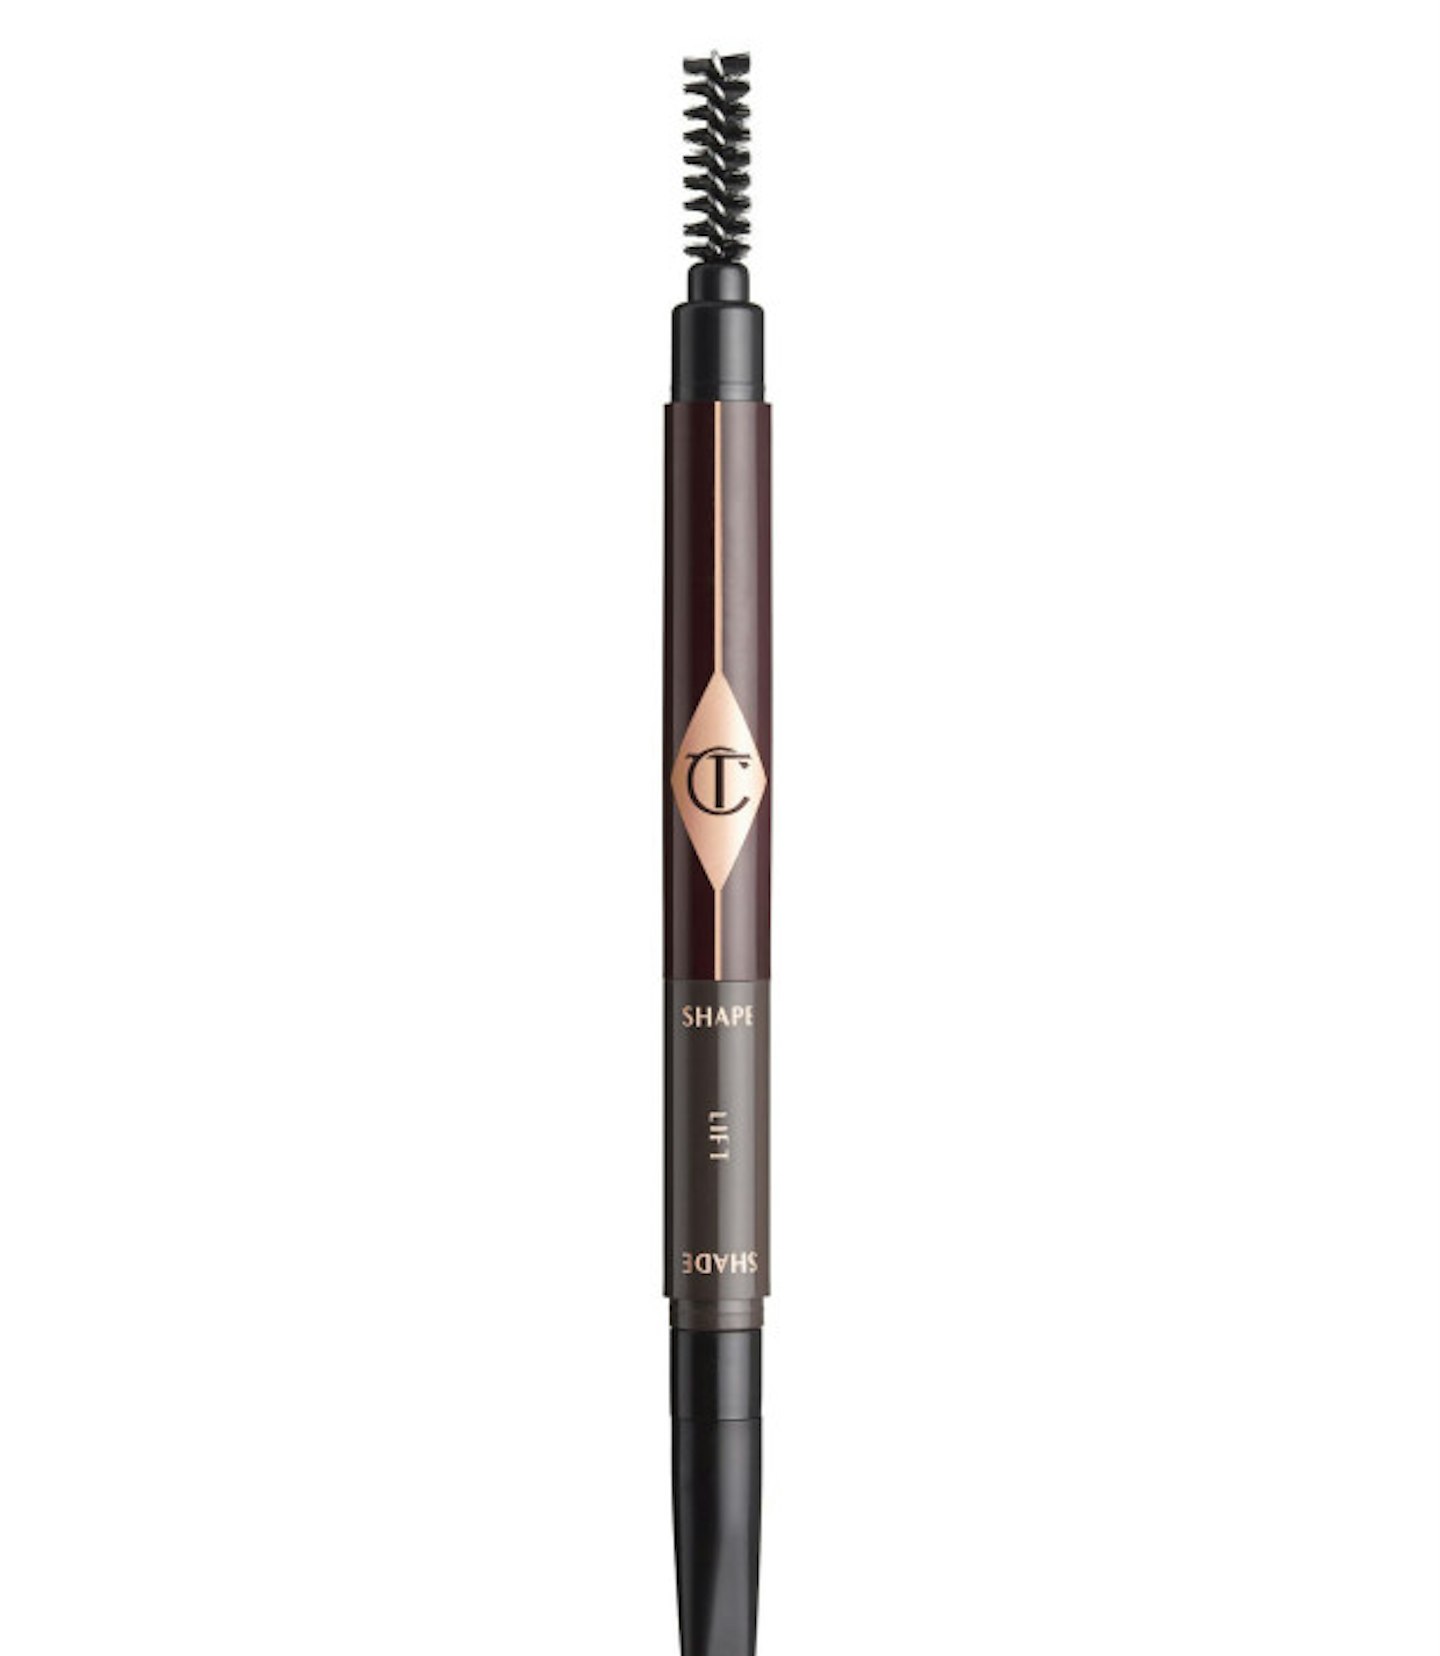 Charlotte enhanced Amal's strong brows with this statement pencil inspired by Cara Delevingne